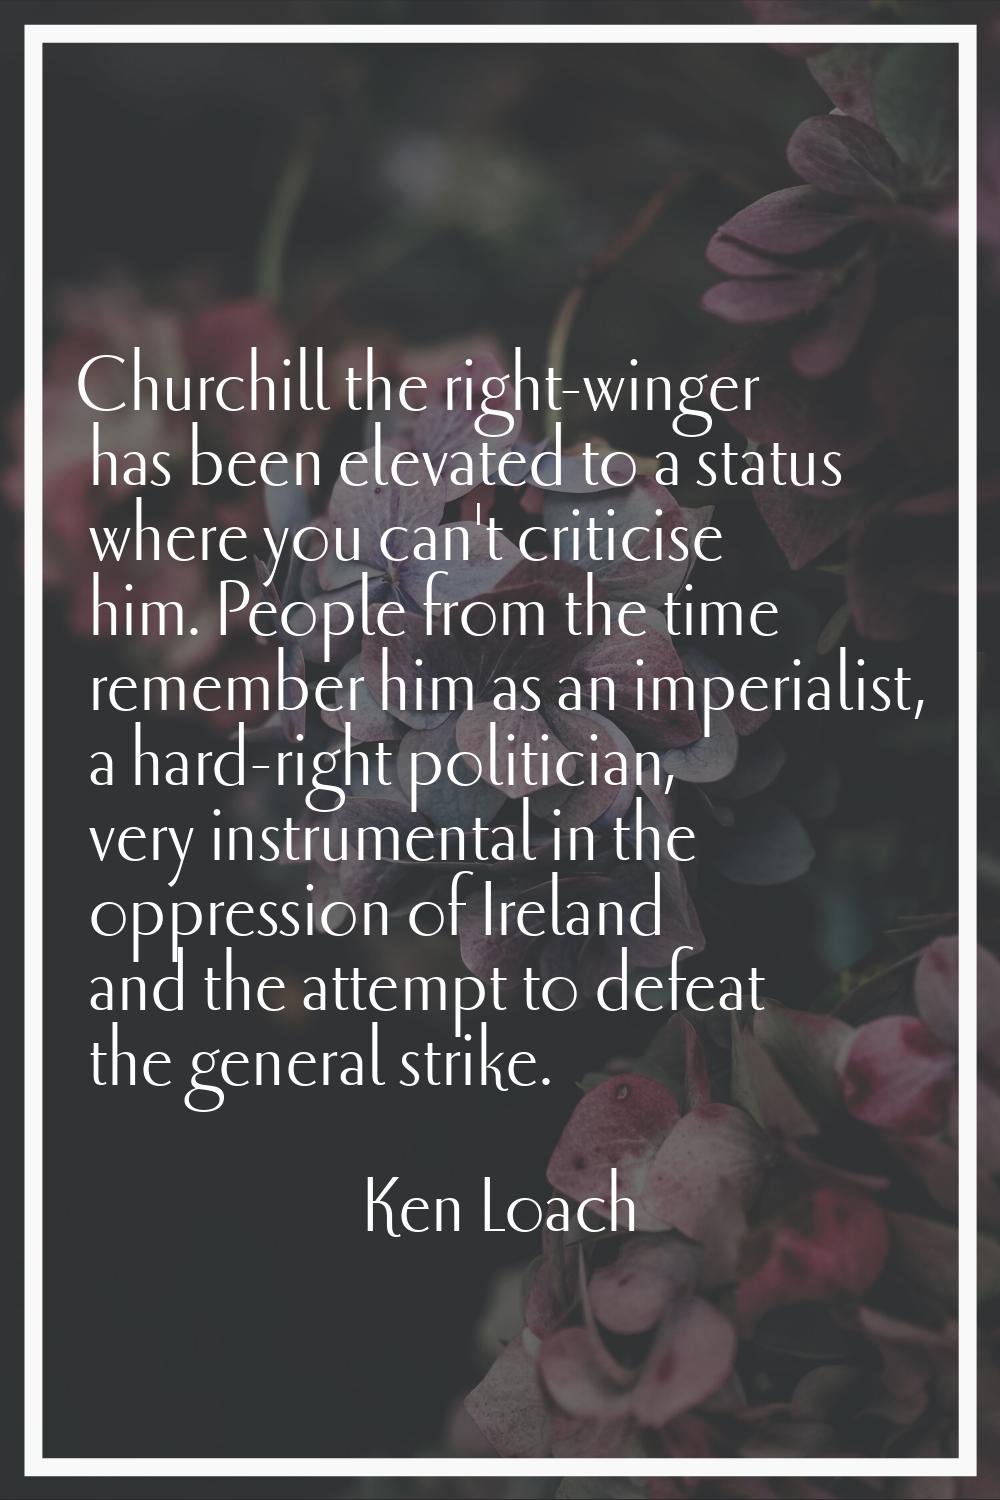 Churchill the right-winger has been elevated to a status where you can't criticise him. People from